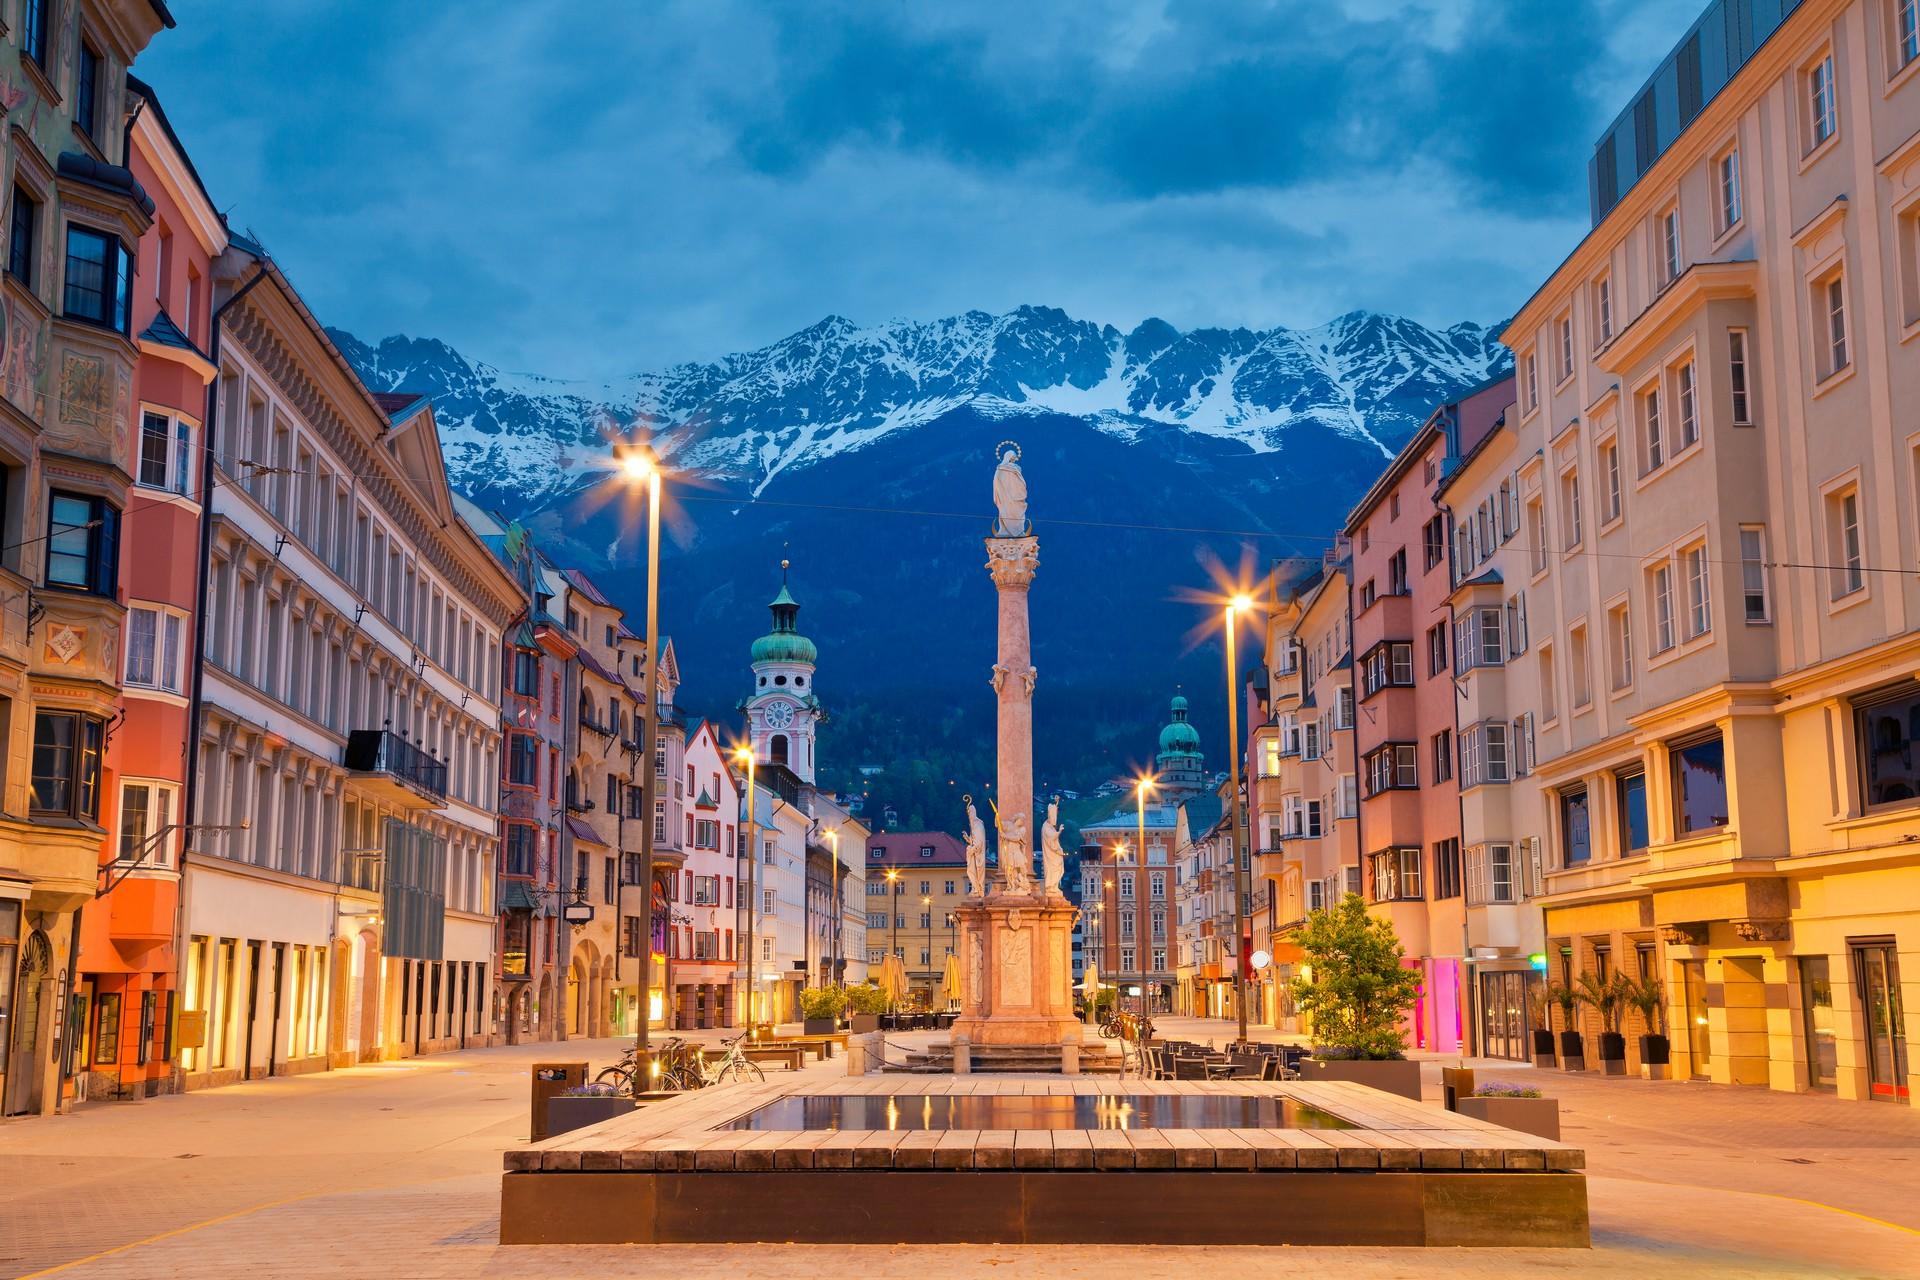 City square in Innsbruck at sunset time